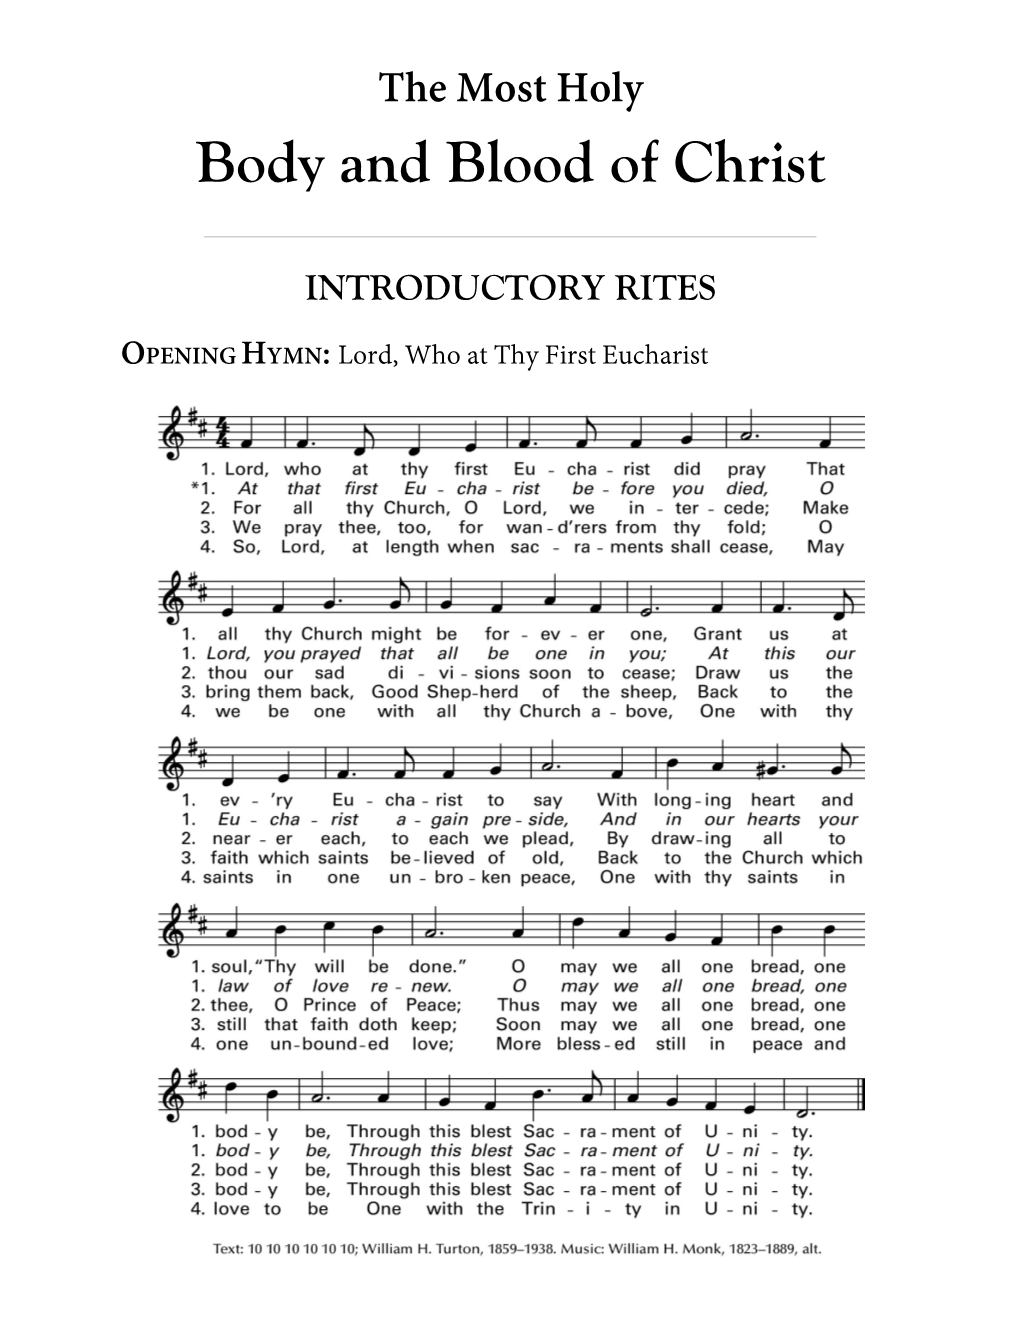 Body and Blood of Christ